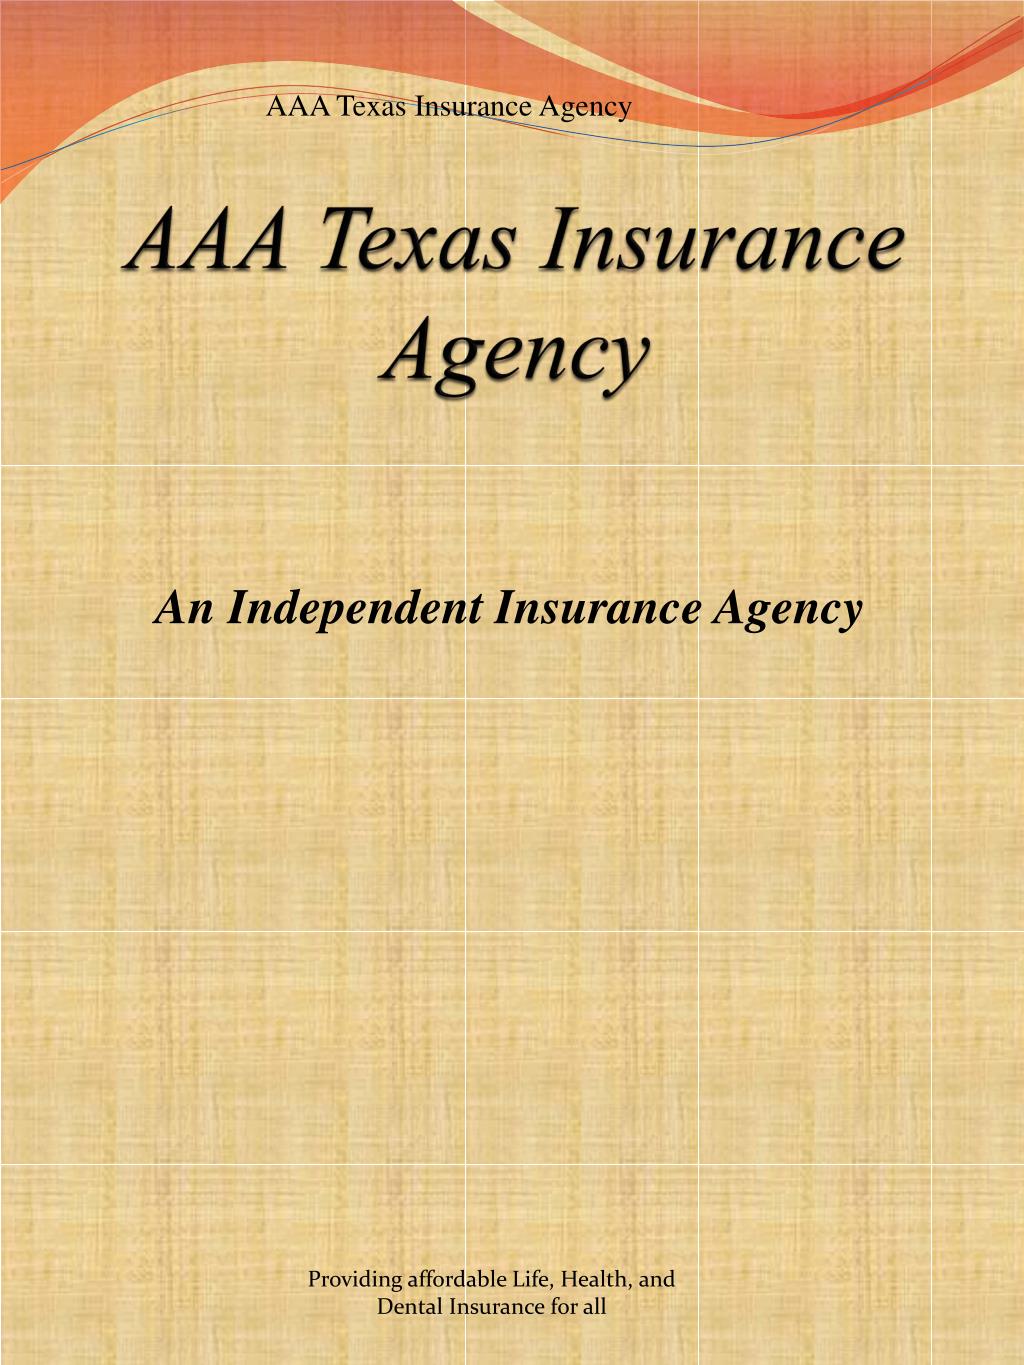 PPT - AAA Texas Insurance Agency PowerPoint Presentation, free download -  ID:2960033